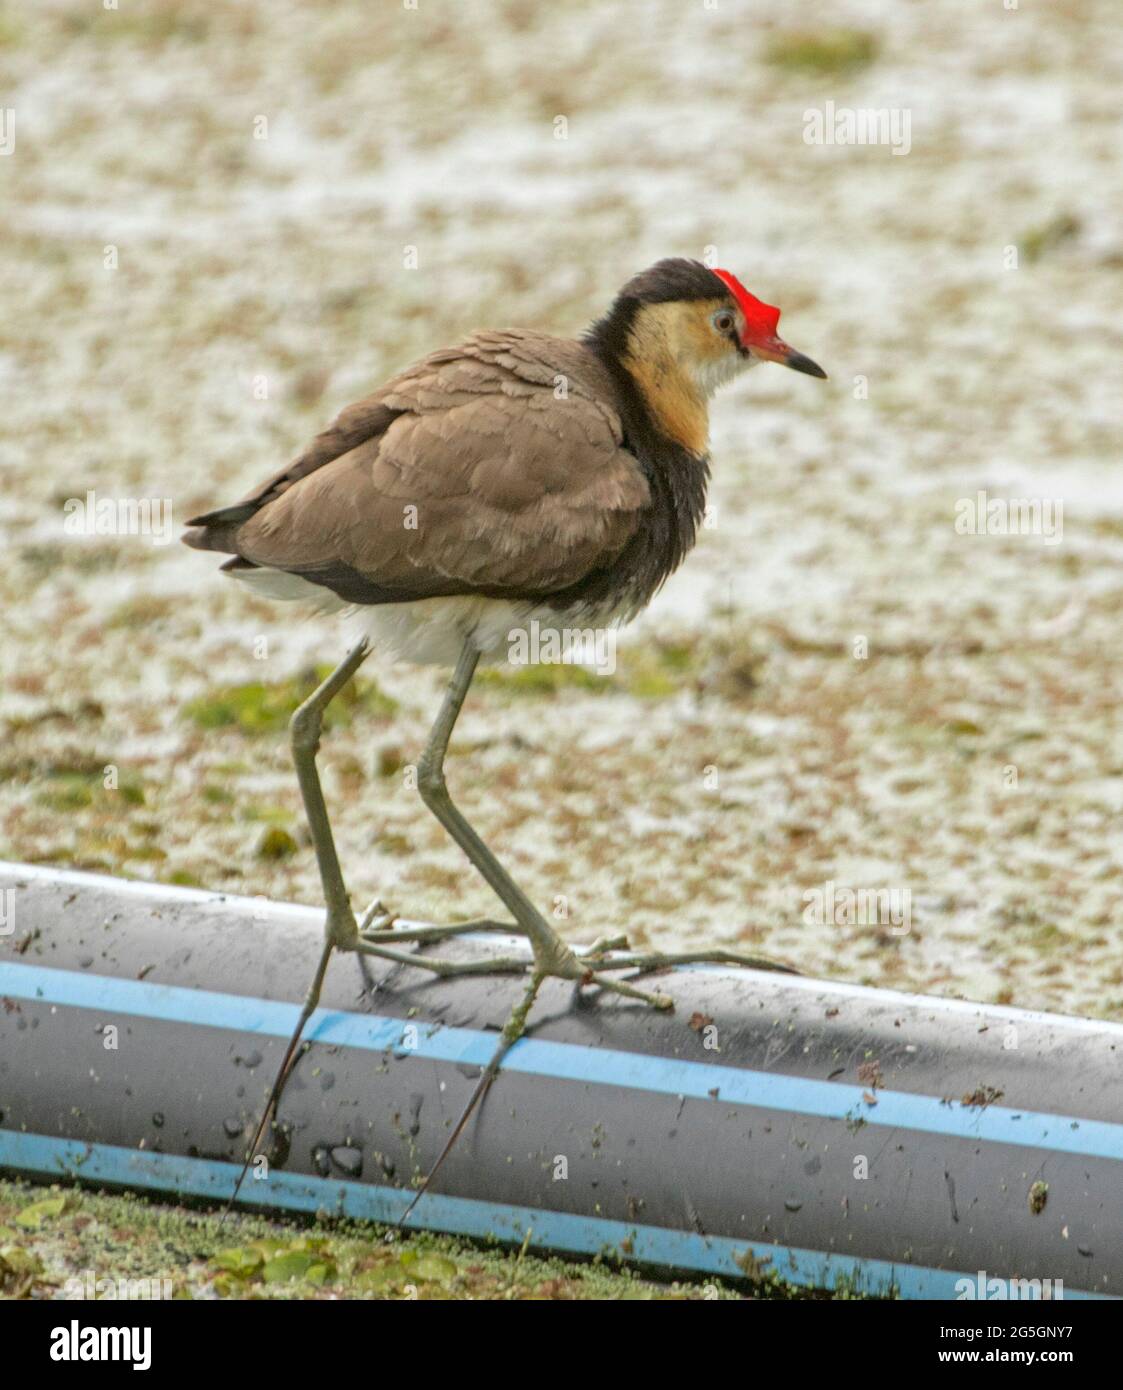 Comb-crested Jacana, Lotusbird, Irediparra gallinacea, with its large feet clearly visible, at a lagoon in a city park in Queensland Australia Stock Photo